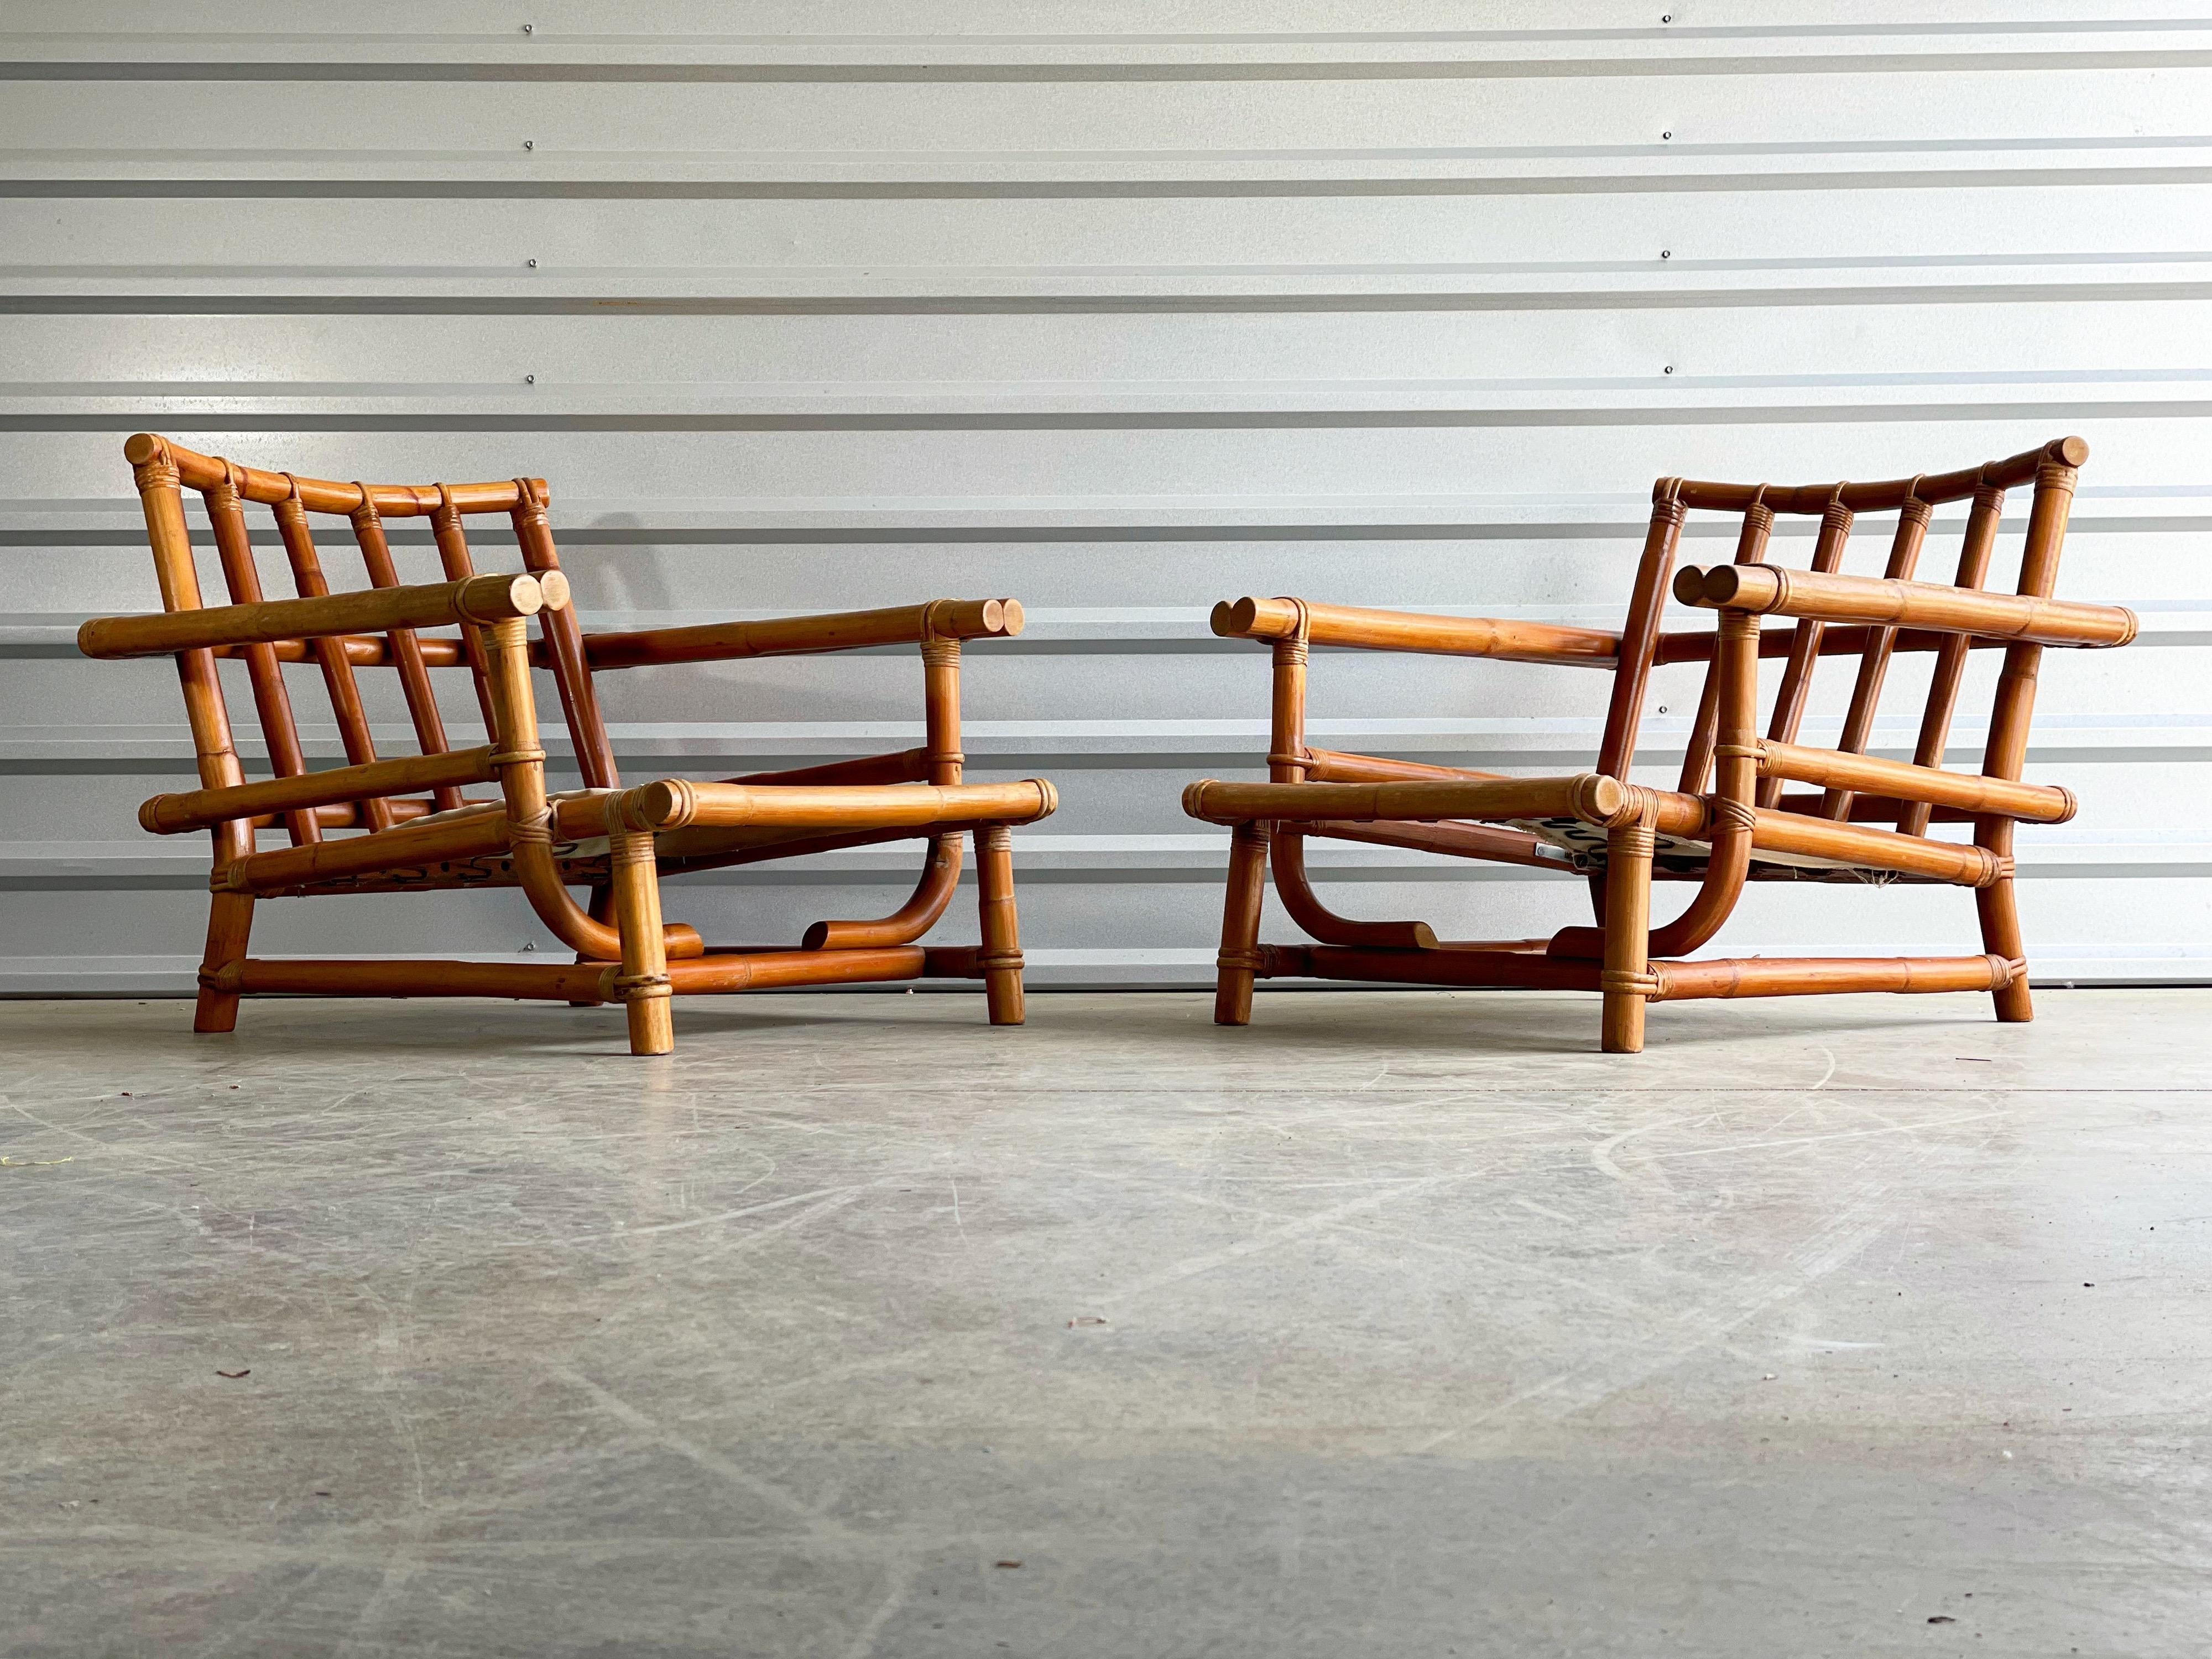 Pair of substantial low slung bamboo rattan lounge chairs by Ficks Reed. Built, circa 1960. Exquisite craftsmanship and top notch materials. Set includes two lounge chairs and one matching ottoman. Rattan frames are in excellent condition with a